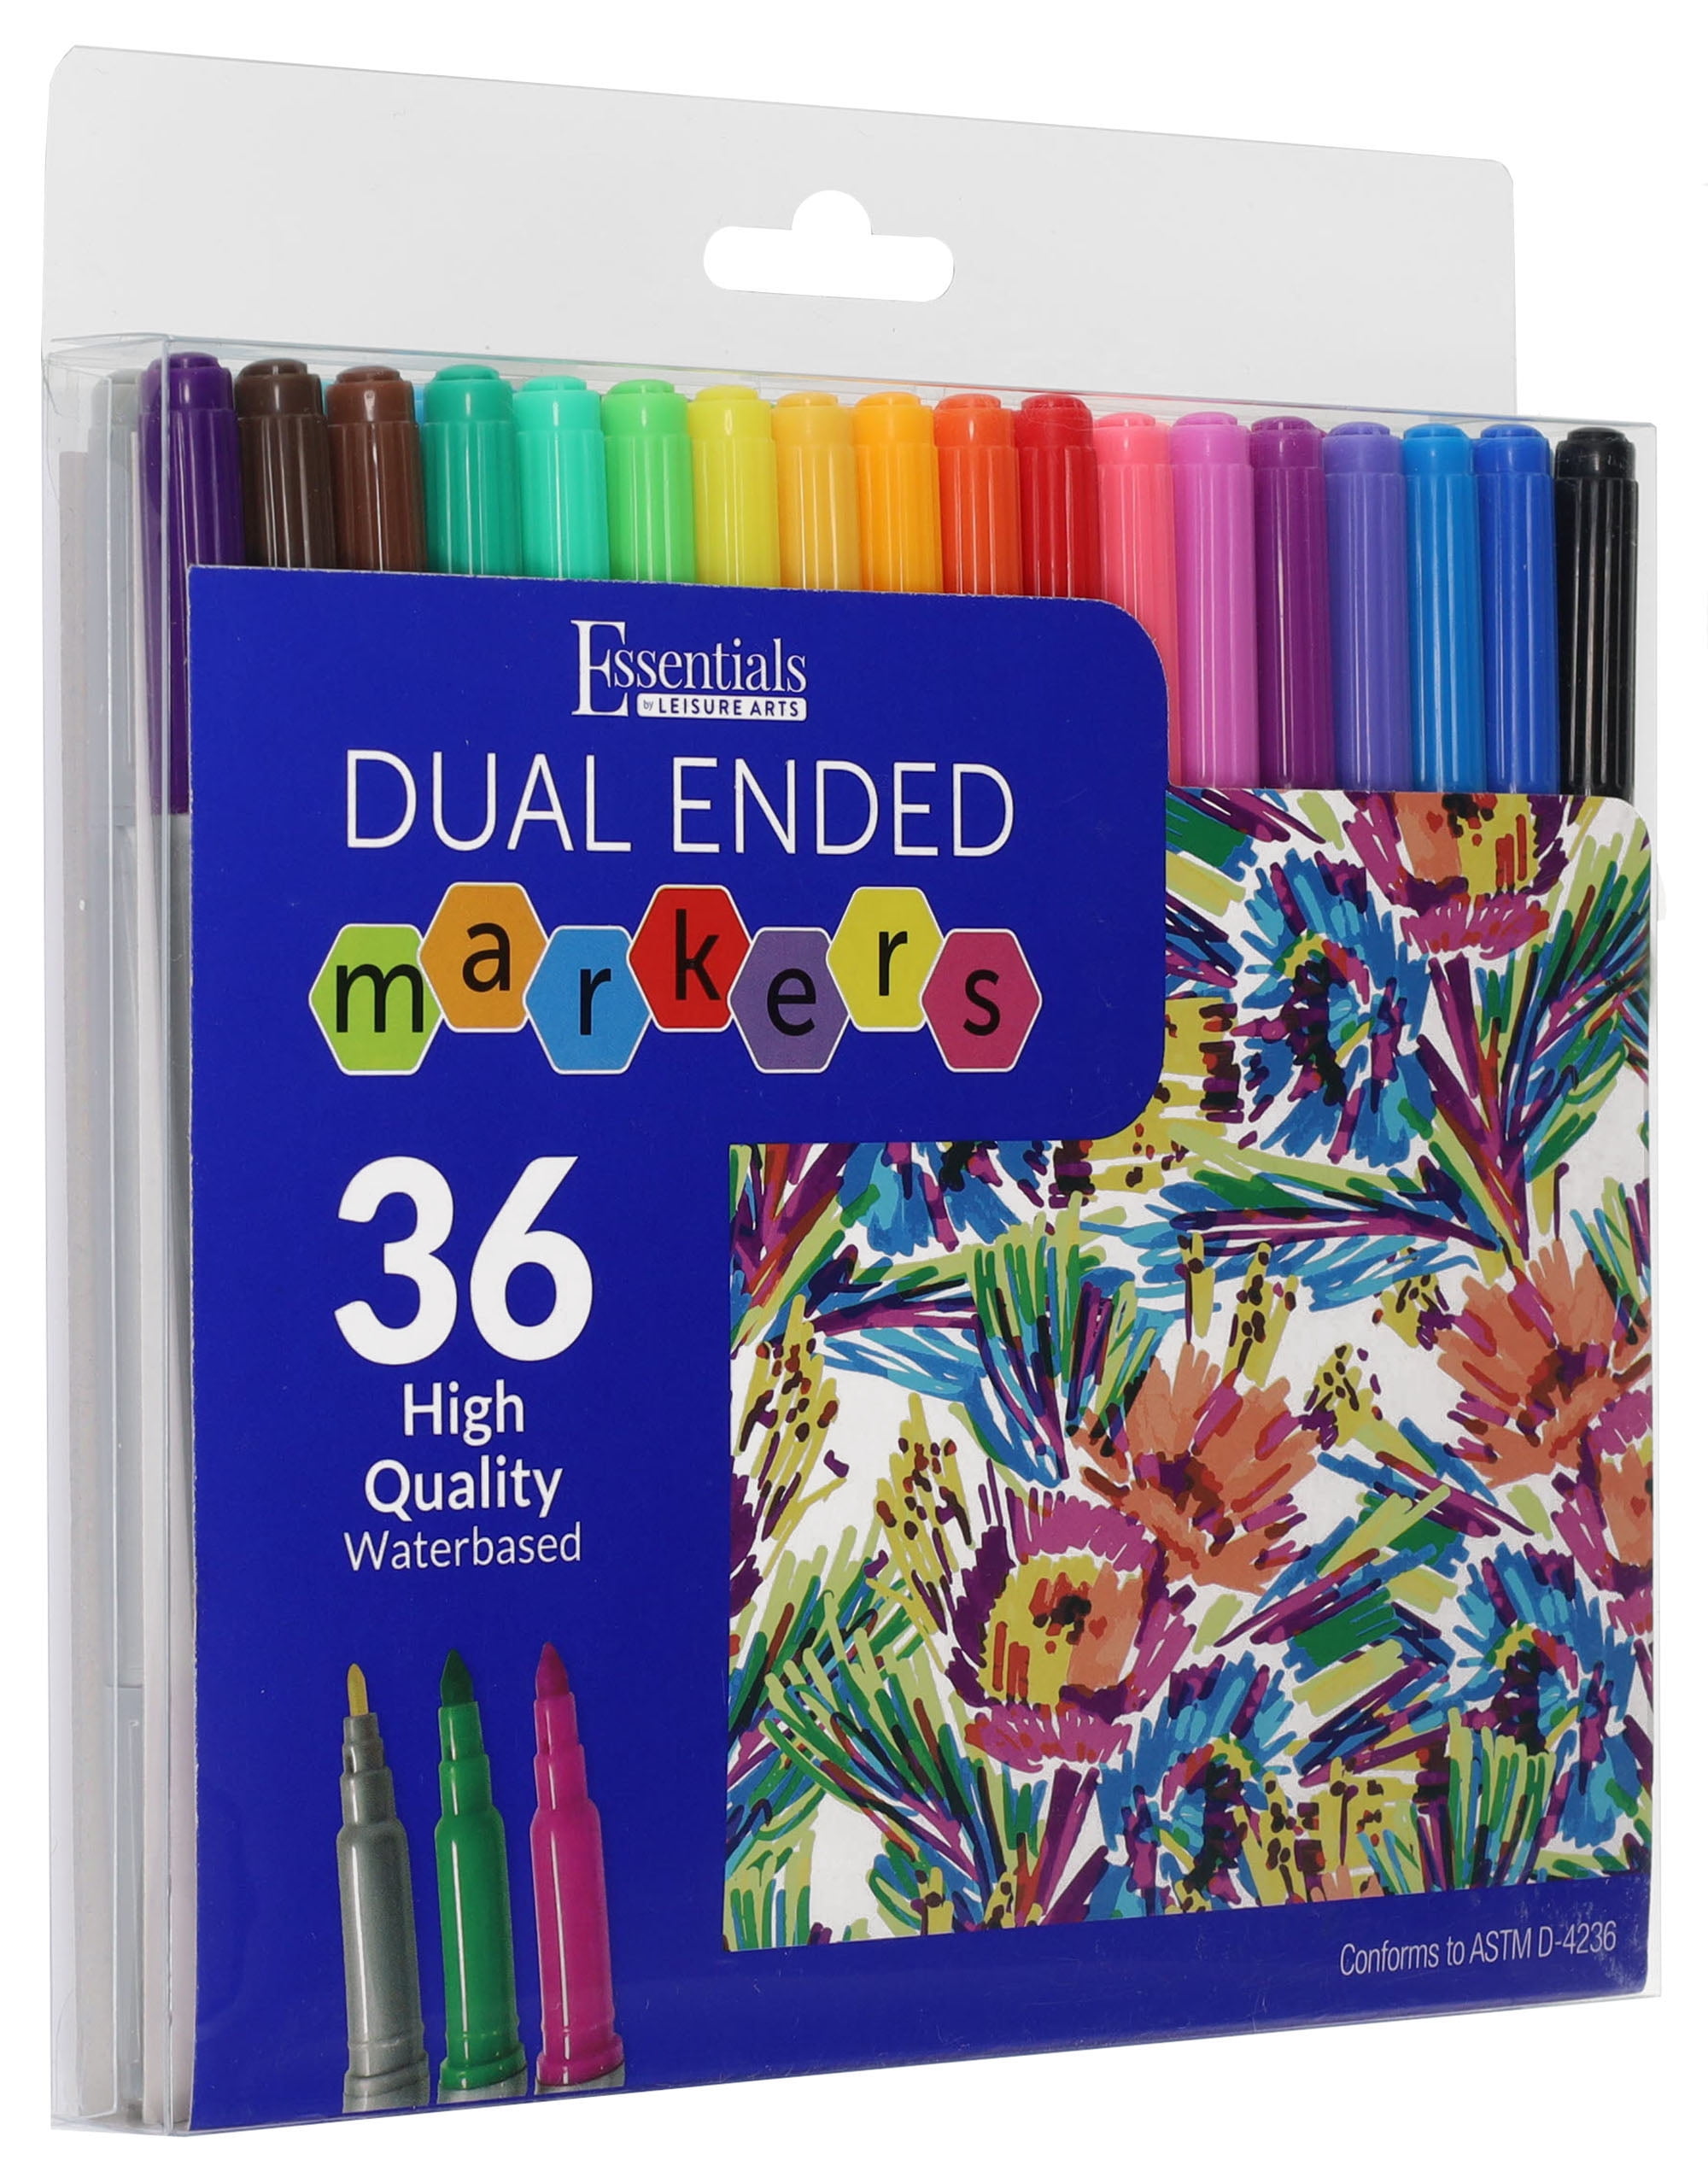 Double Up! 2-in-1 Set of 36 Mini Markers – Luxe